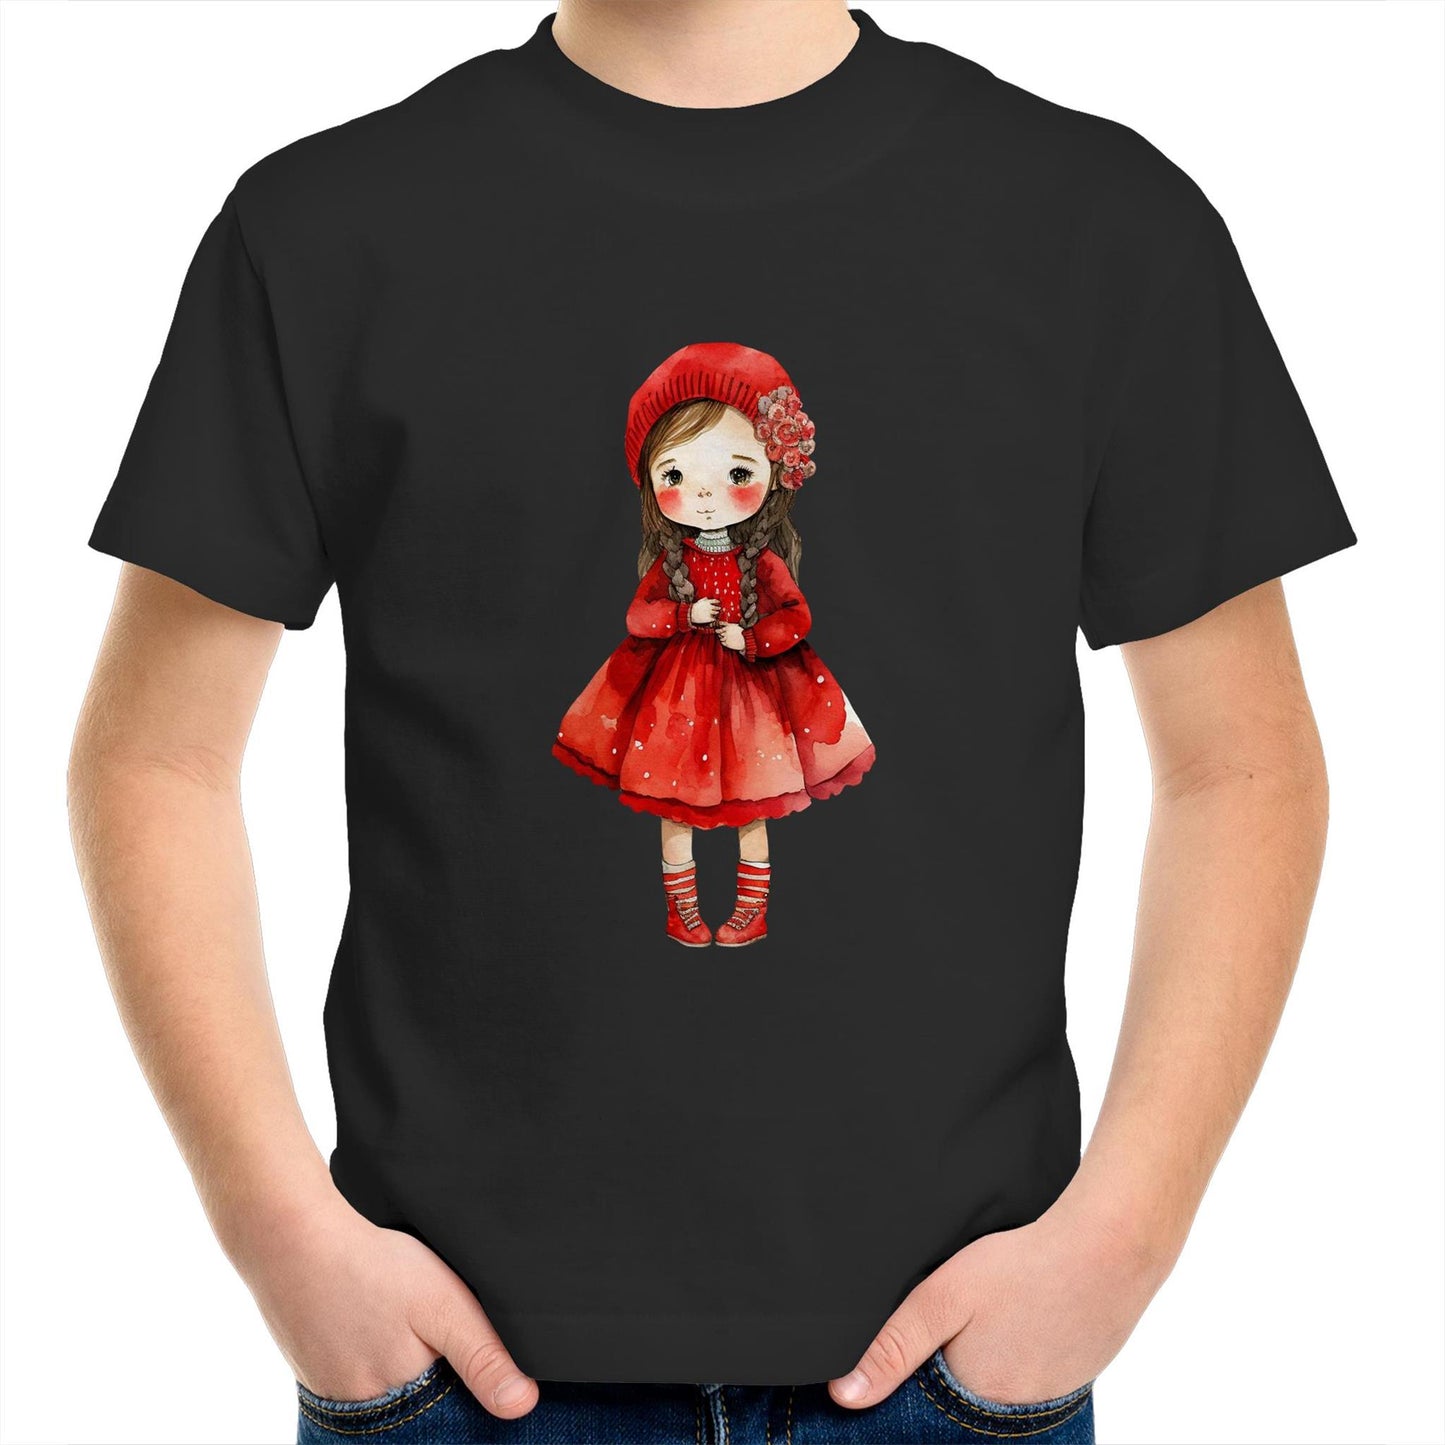 Red Girl Unisex Kids Youth Crew T-Shirt